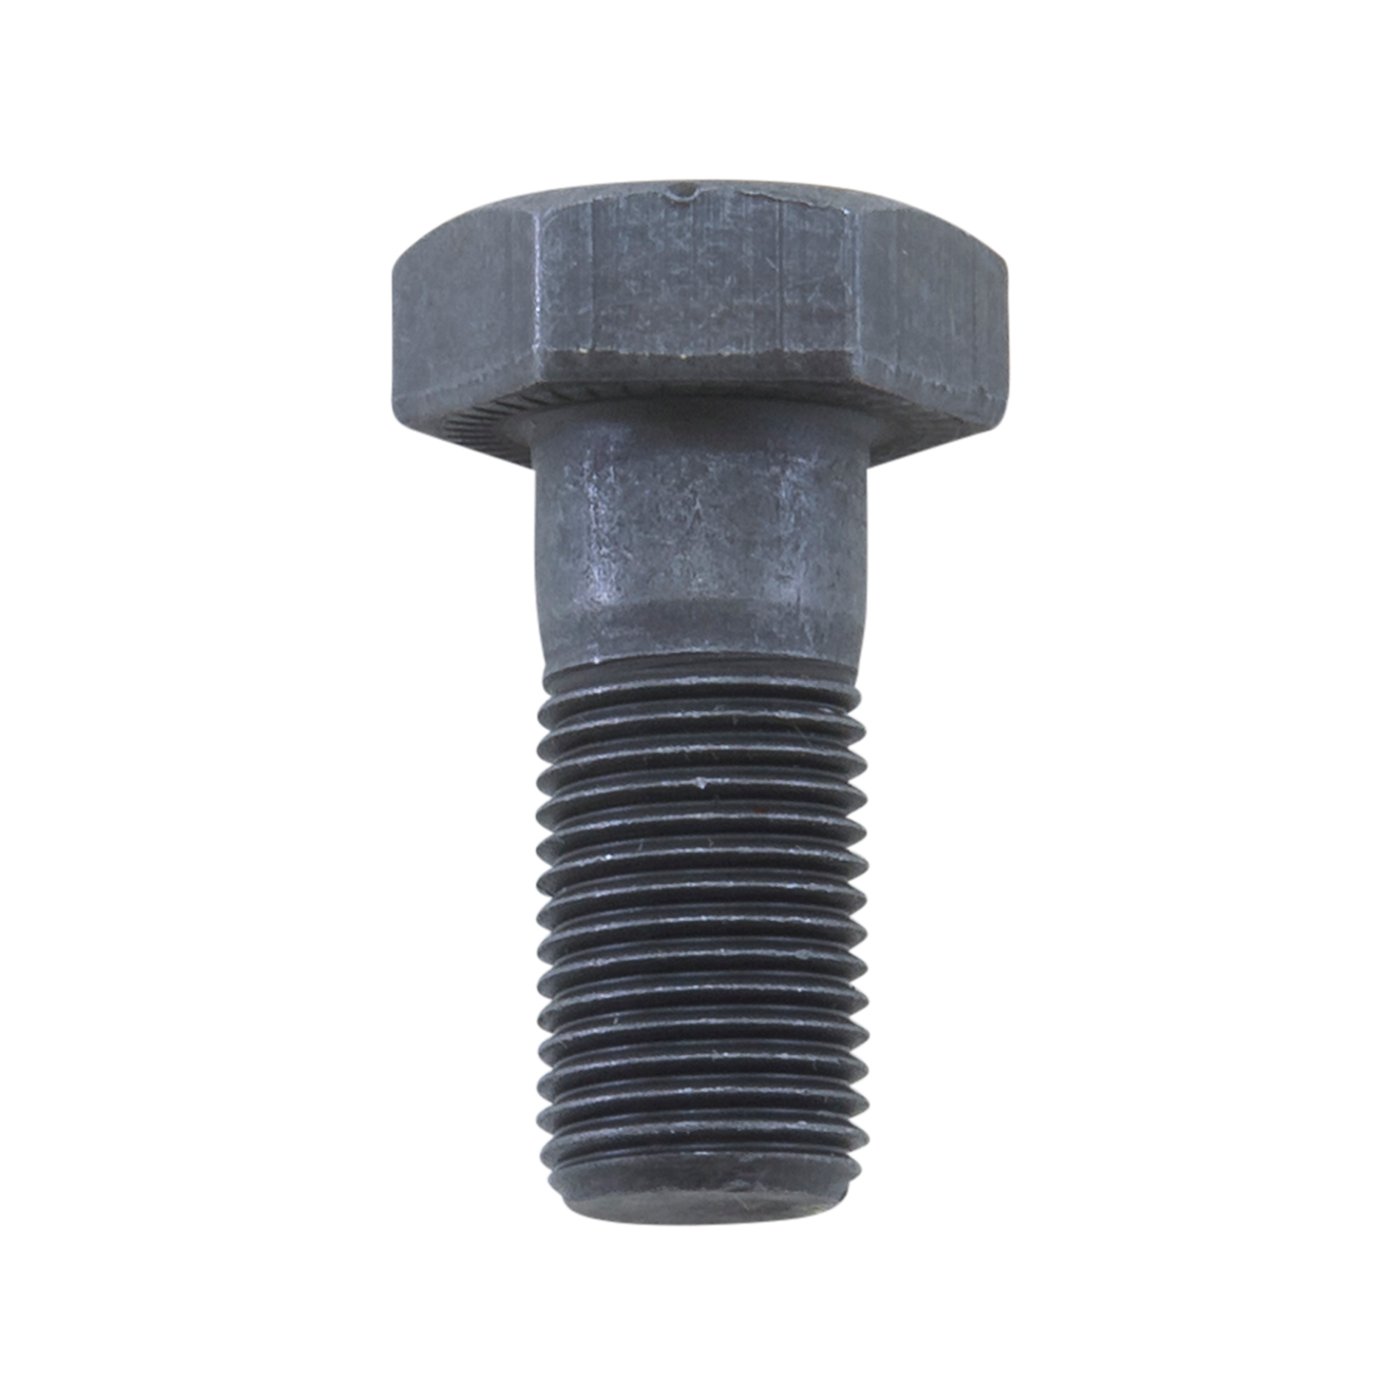 Replacement Ring Gear Bolt For Dana 60, 70, 70U & 70Hd, 1/2 in. X 20.